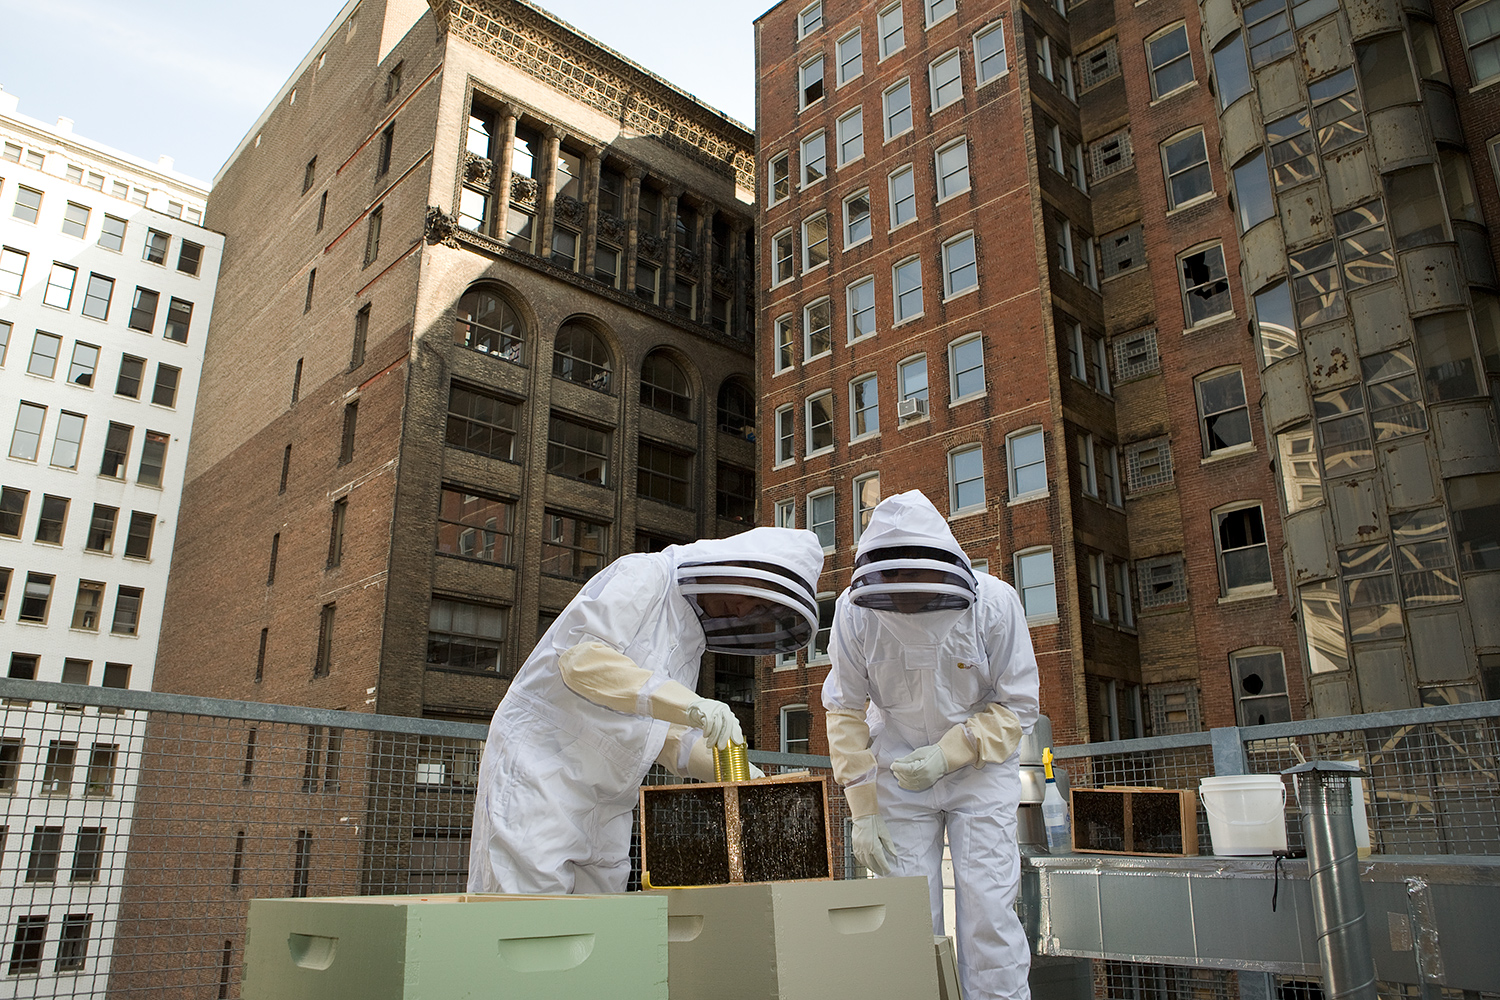  Natalie Semchyshyn and Amos Harris bring out the queen of their first beehive on their roof. St. Louis, Missouri. 